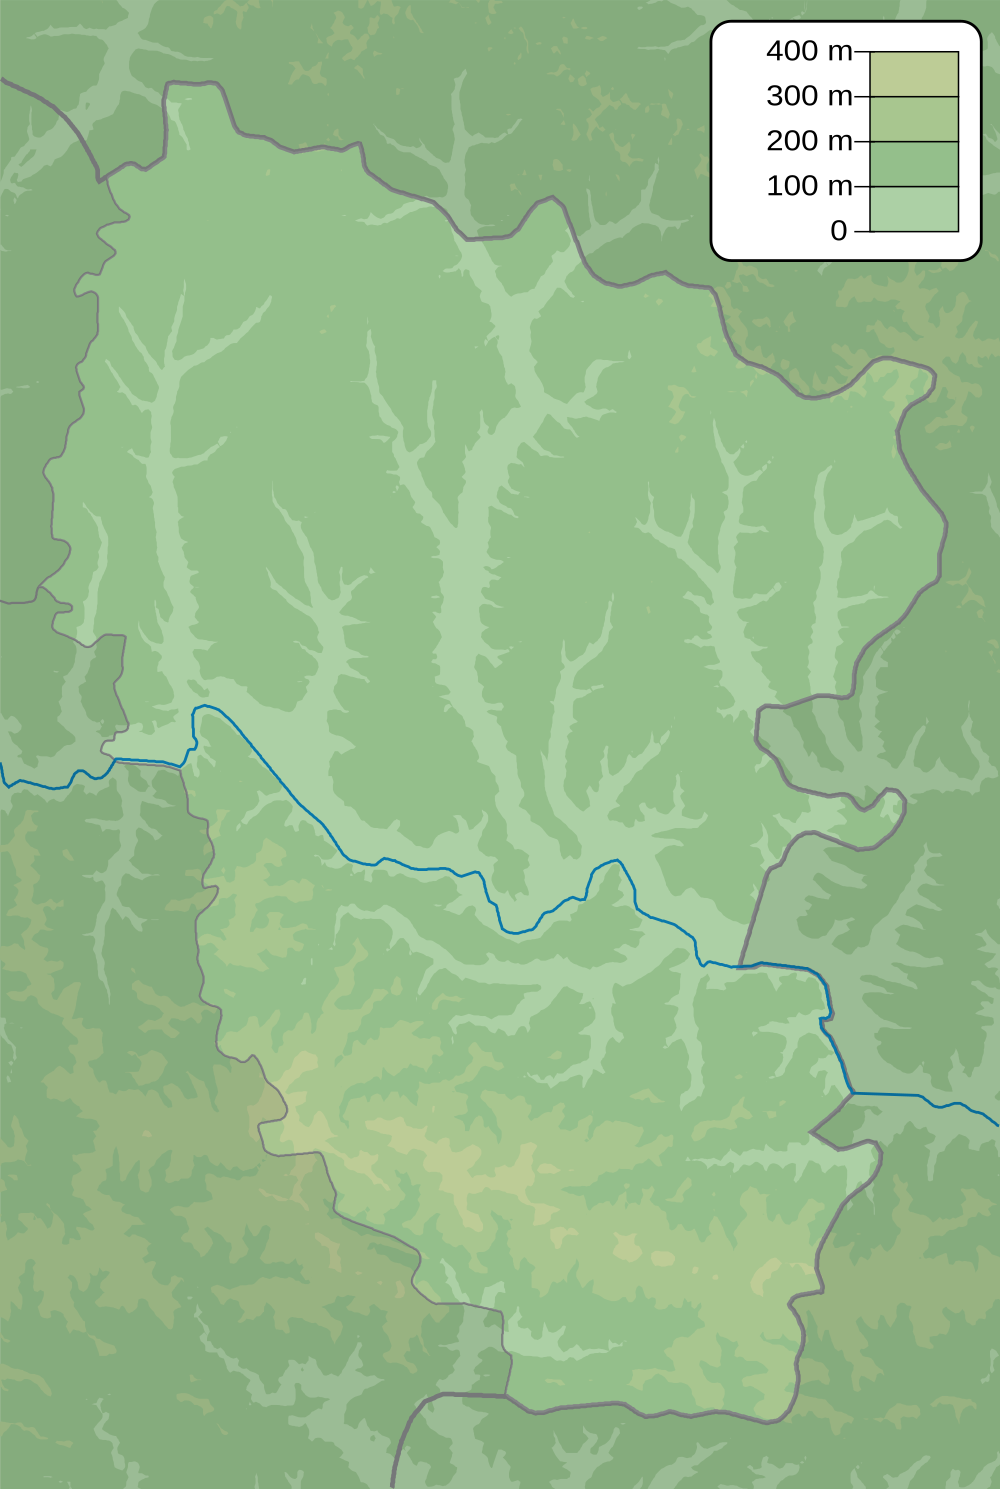 Russo-Ukrainian War detailed relief map (oblasts) is located in Luhansk Oblast